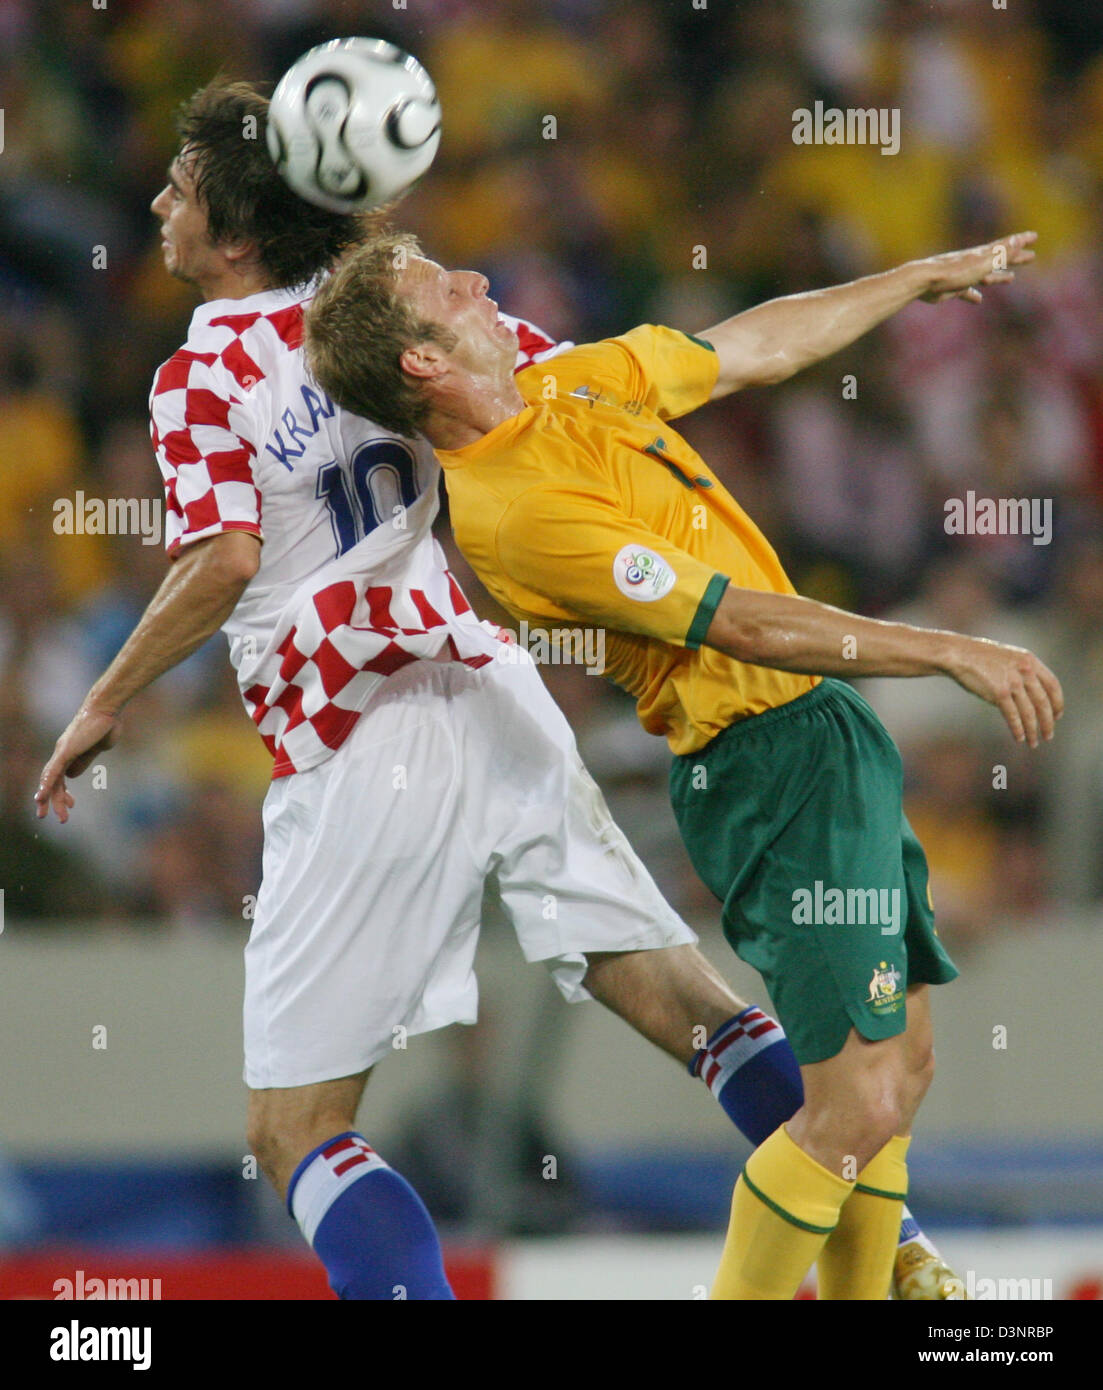 Niko Kranjcar (L) of Croatia and Vince Grella from Australia head the ball during the group F match of the 2006 FIFA World Cup between Croatia and Australia in Stuttgart, Germany, Thursday 22 June 2006. DPA/Patrick Seeger +++ Mobile Services OUT +++ Please also refer to FIFA's Terms and Conditions. Stock Photo